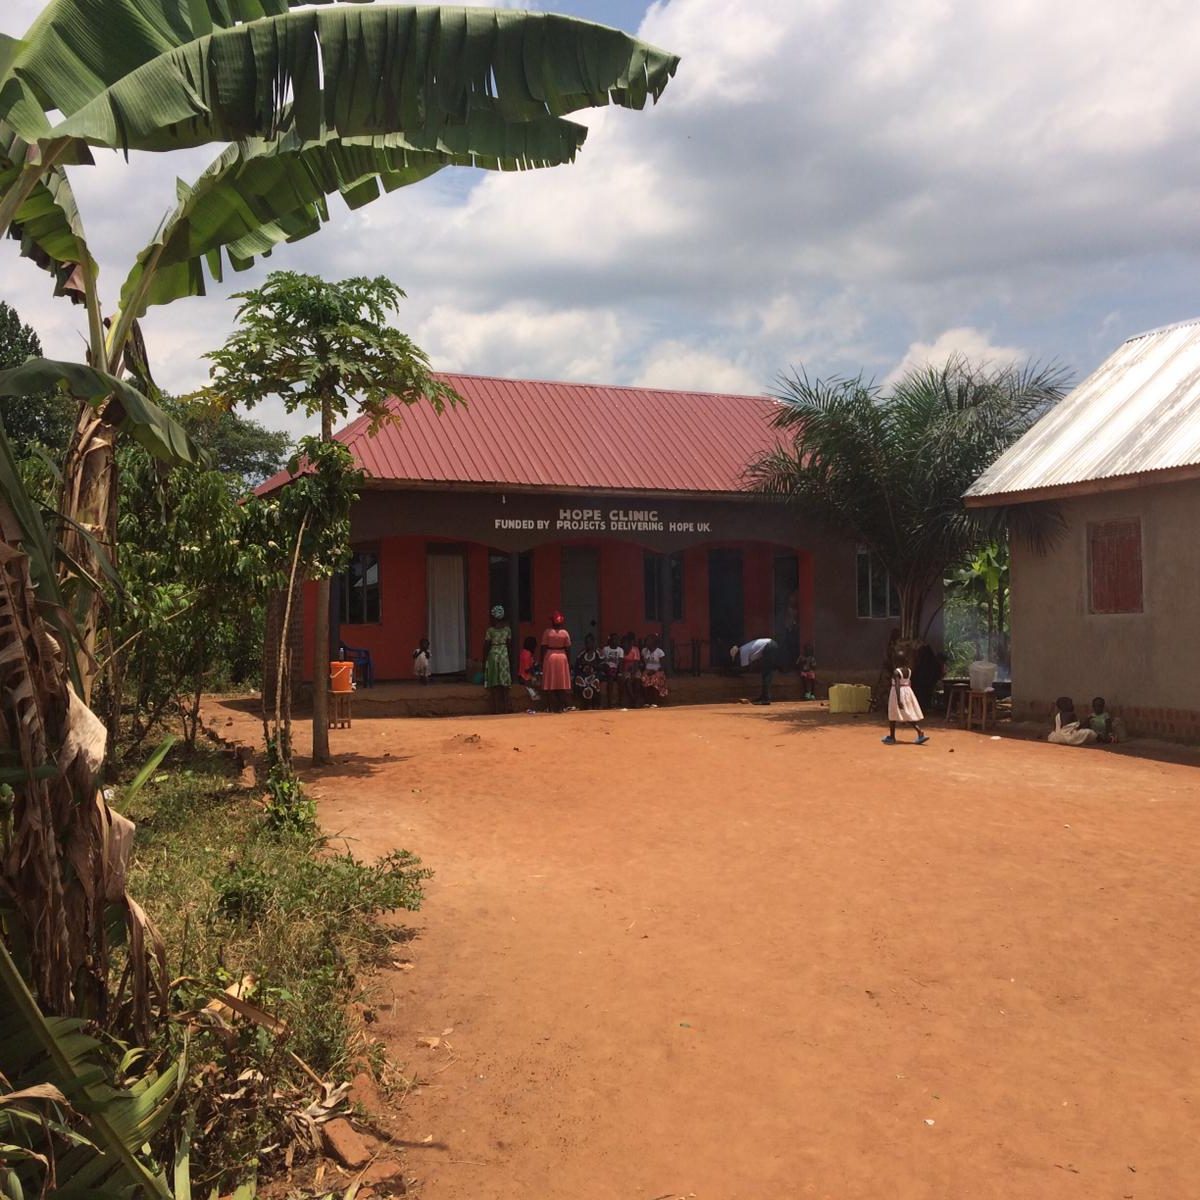 The Hope Clinic funded by Projects Delivering Hope